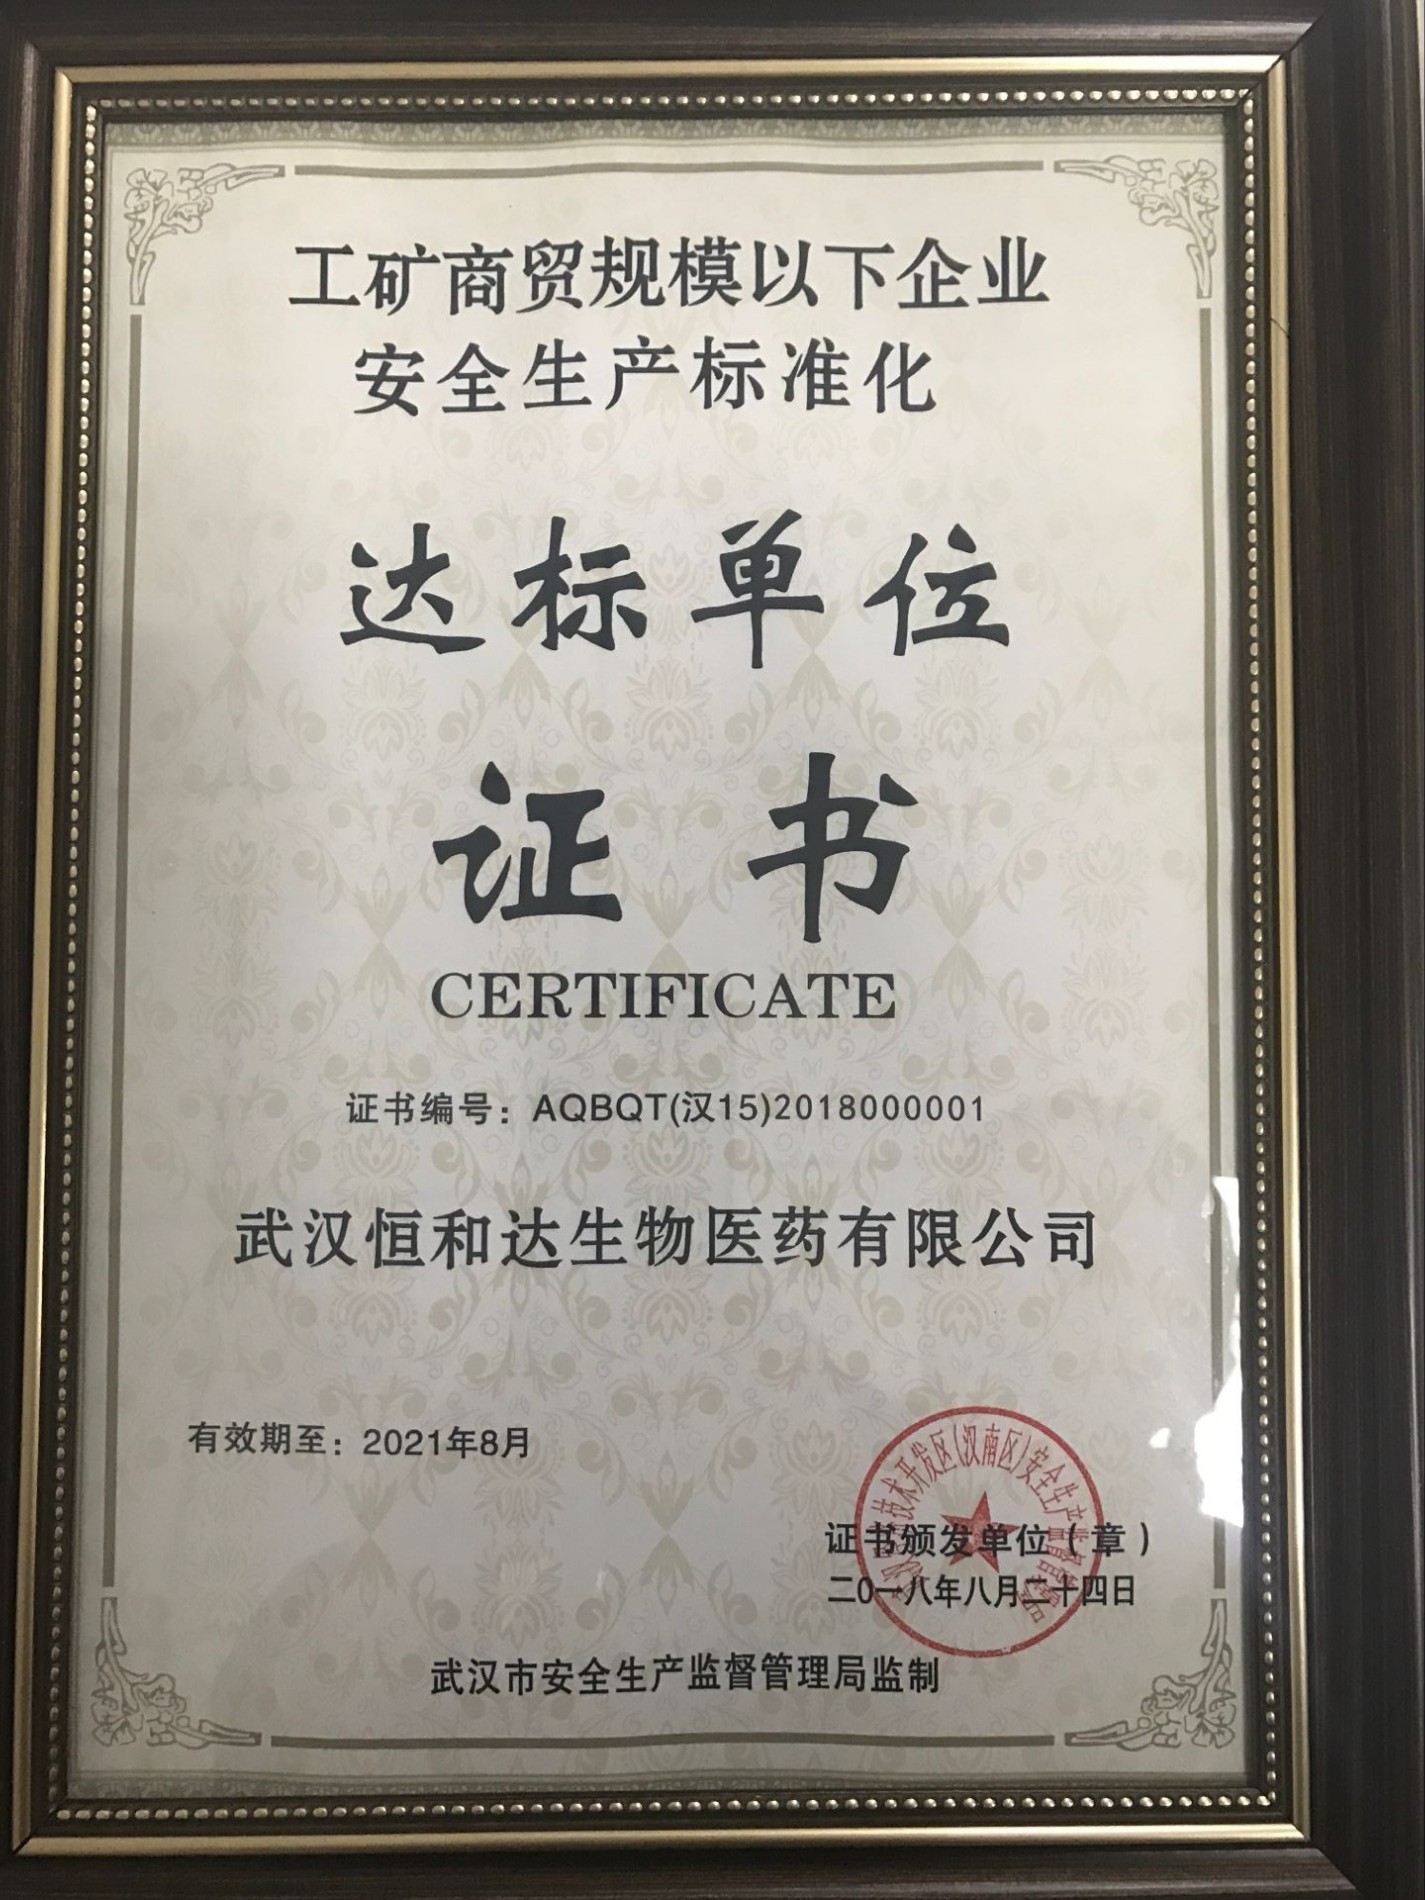 Safety manufacture certificate